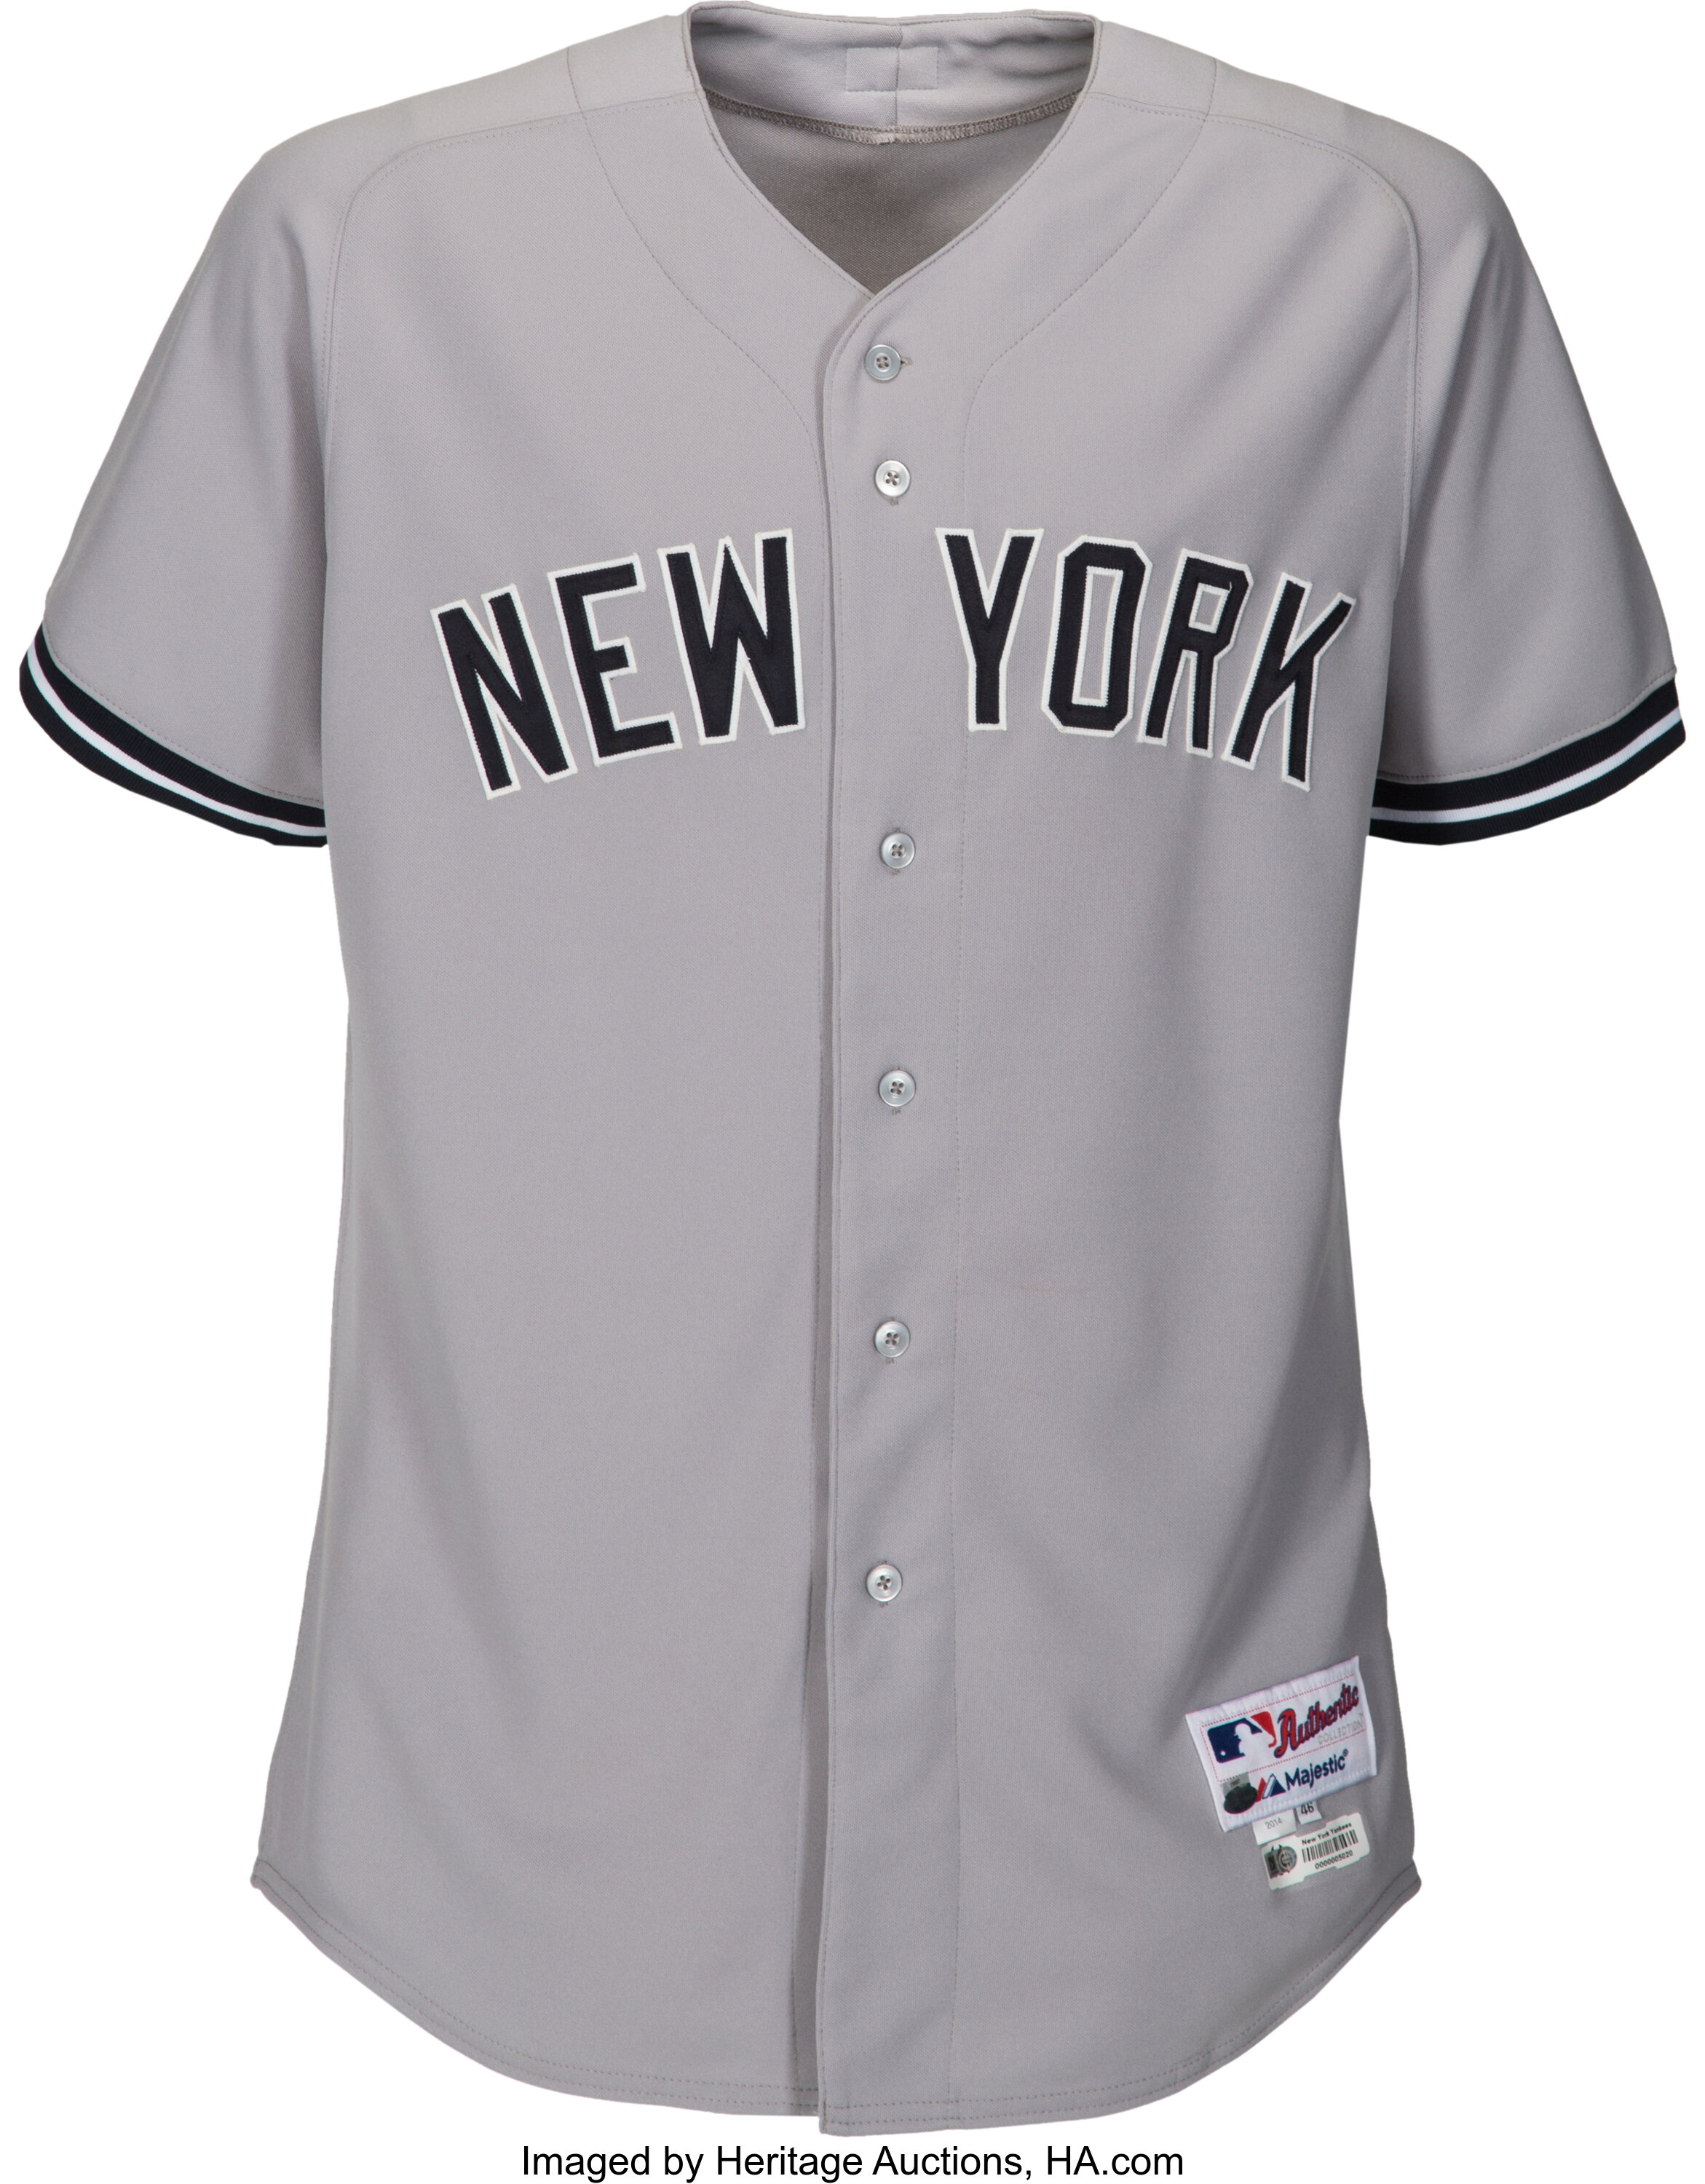 New York Yankees Game Worn Jersey and Pants Collection - All Steiner  Certified (25+)